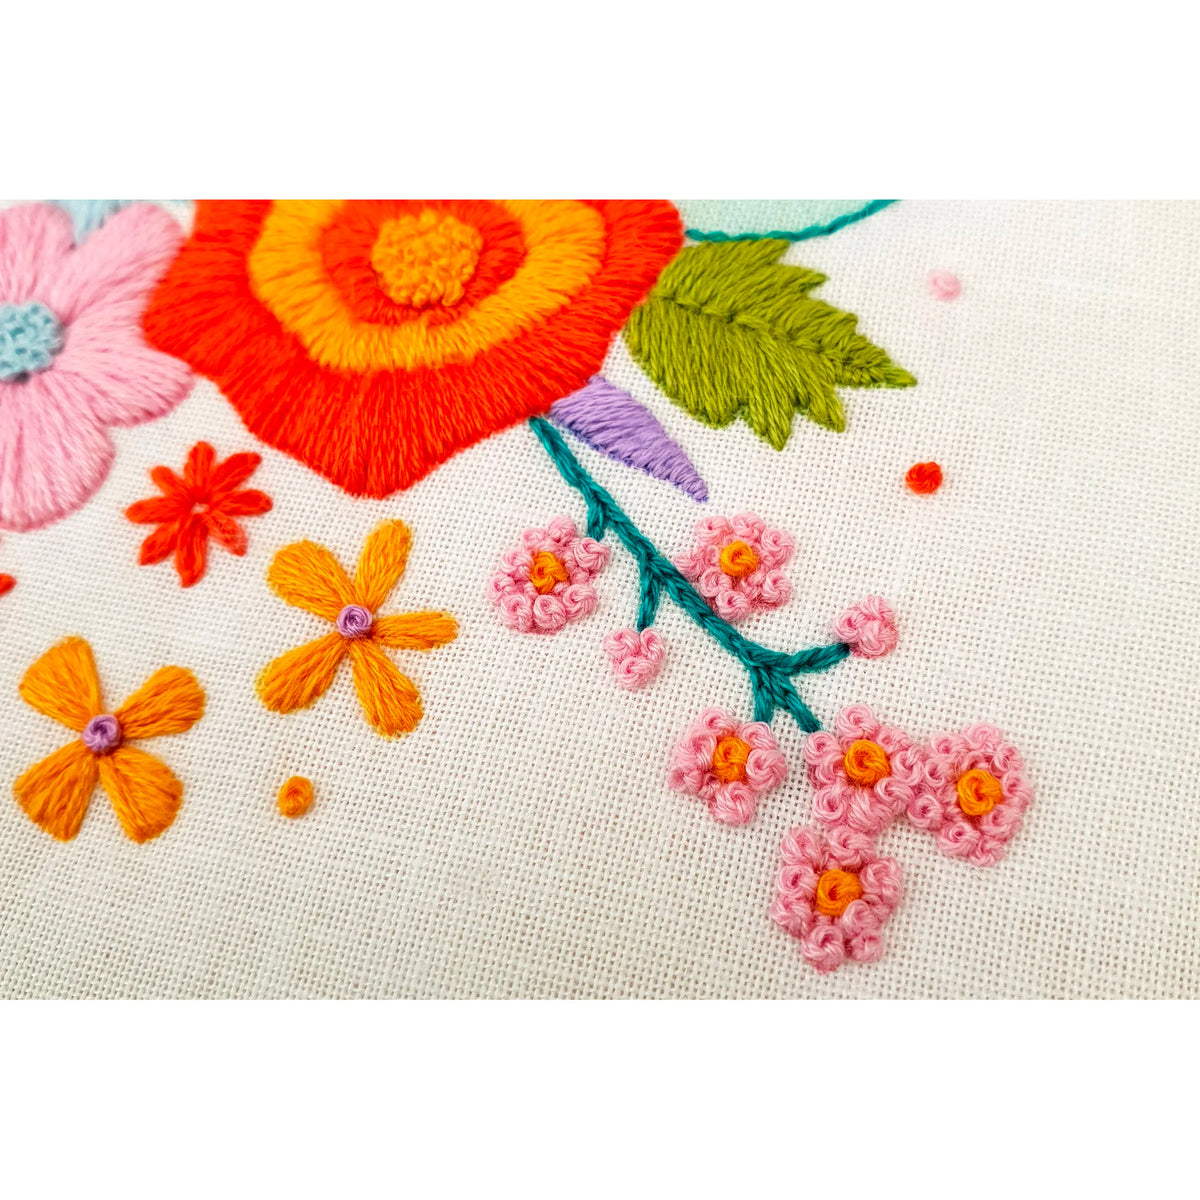 Spring Flowers Hand Embroidery Kit - Stitched Modern